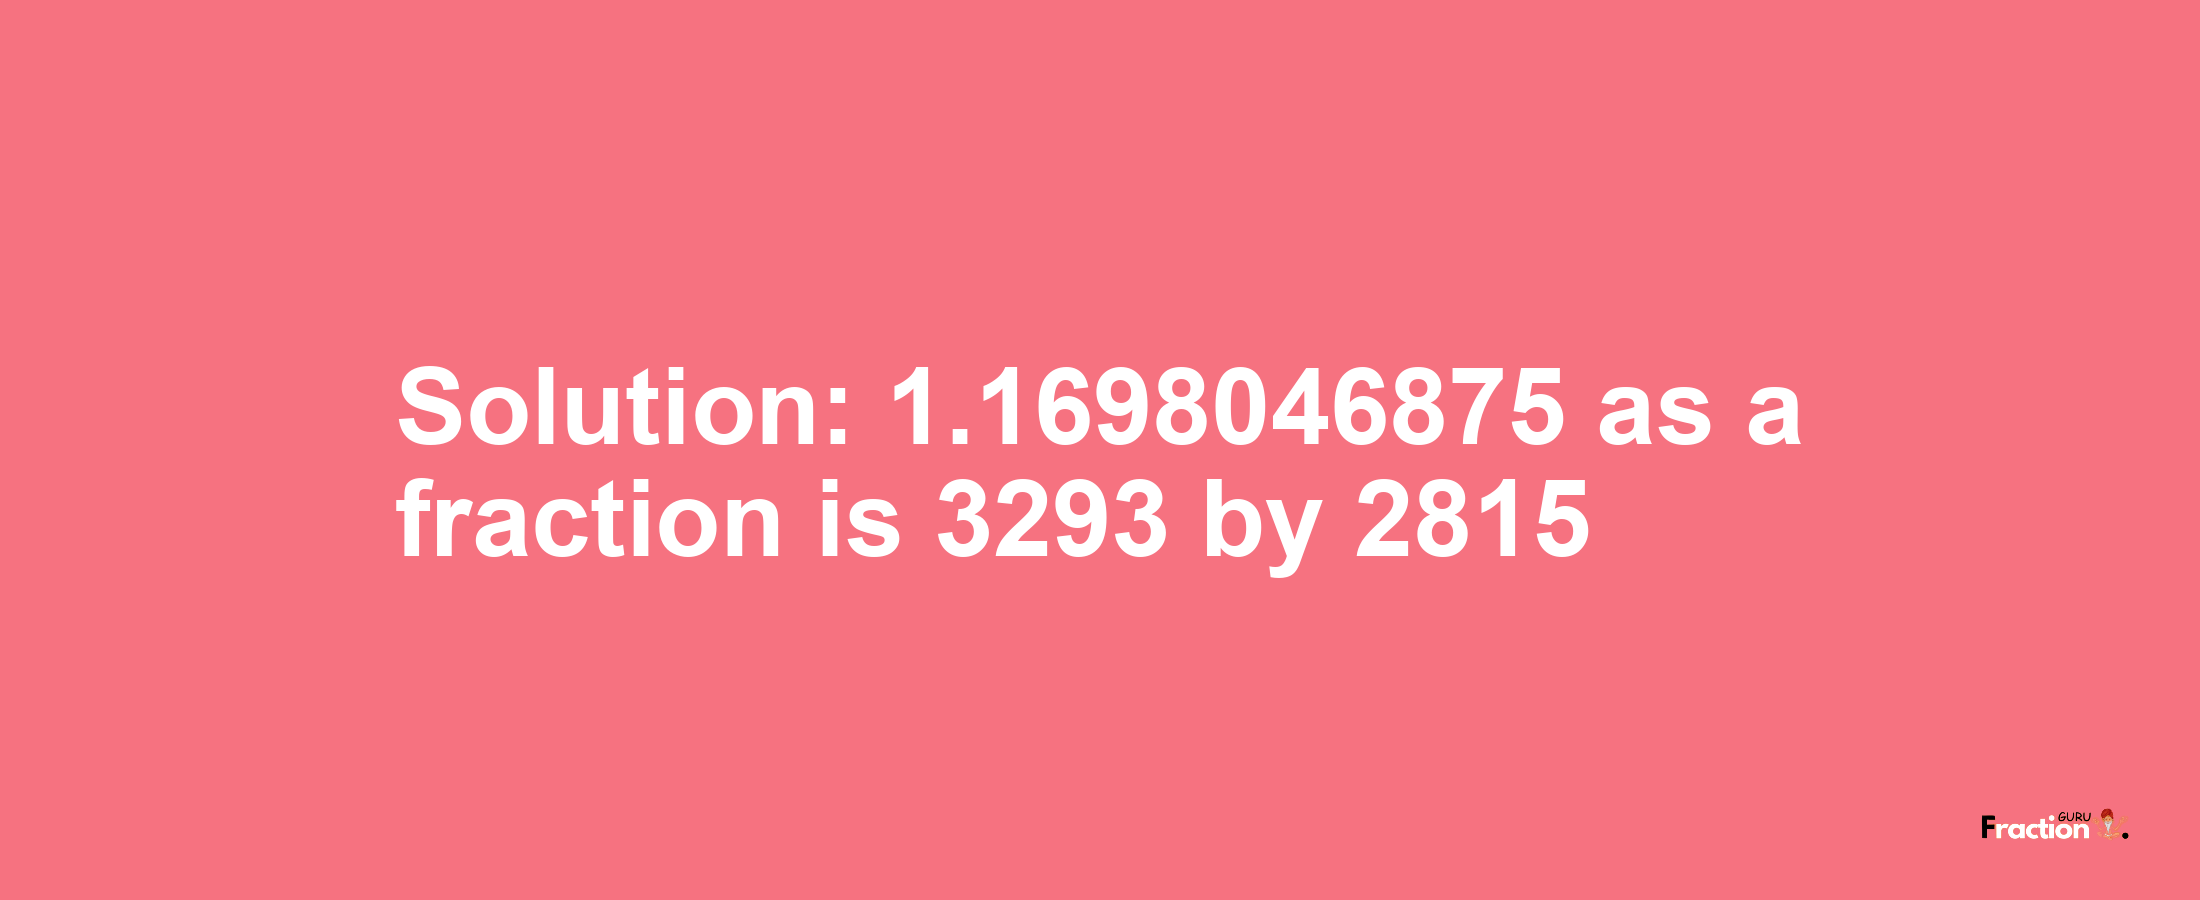 Solution:1.1698046875 as a fraction is 3293/2815